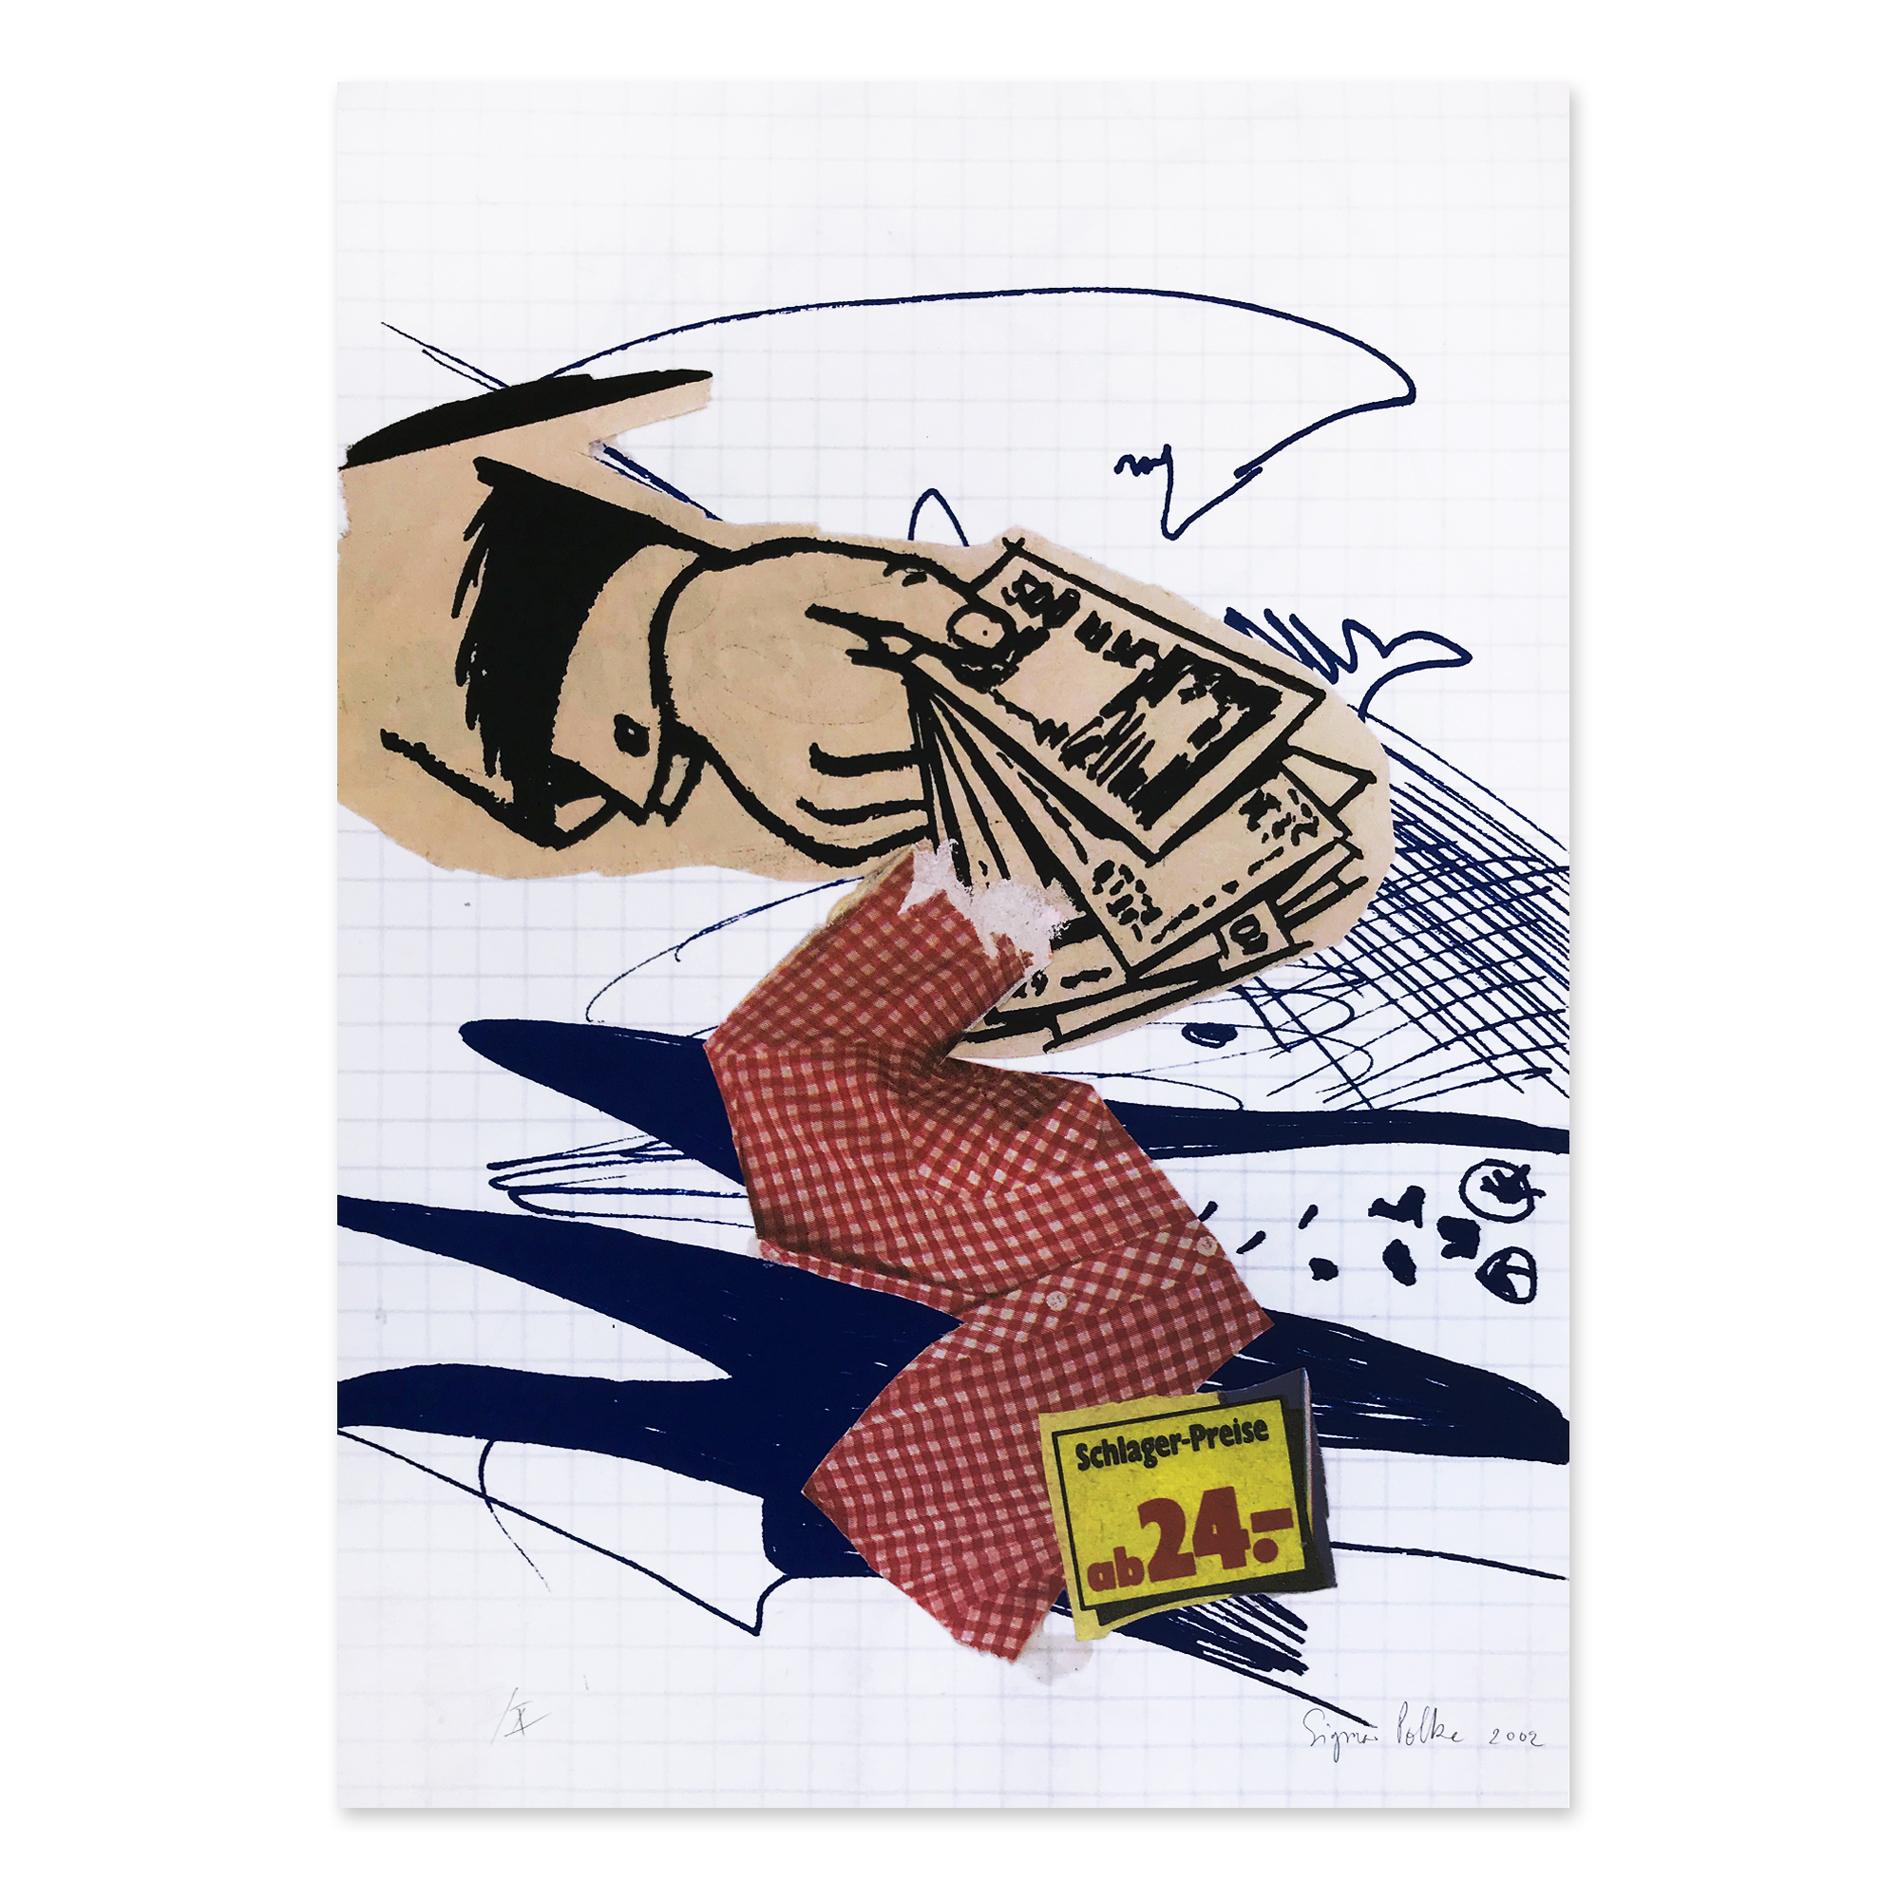 Sigmar Polke Figurative Print - Bargeld Lacht (Cash is Laughing)